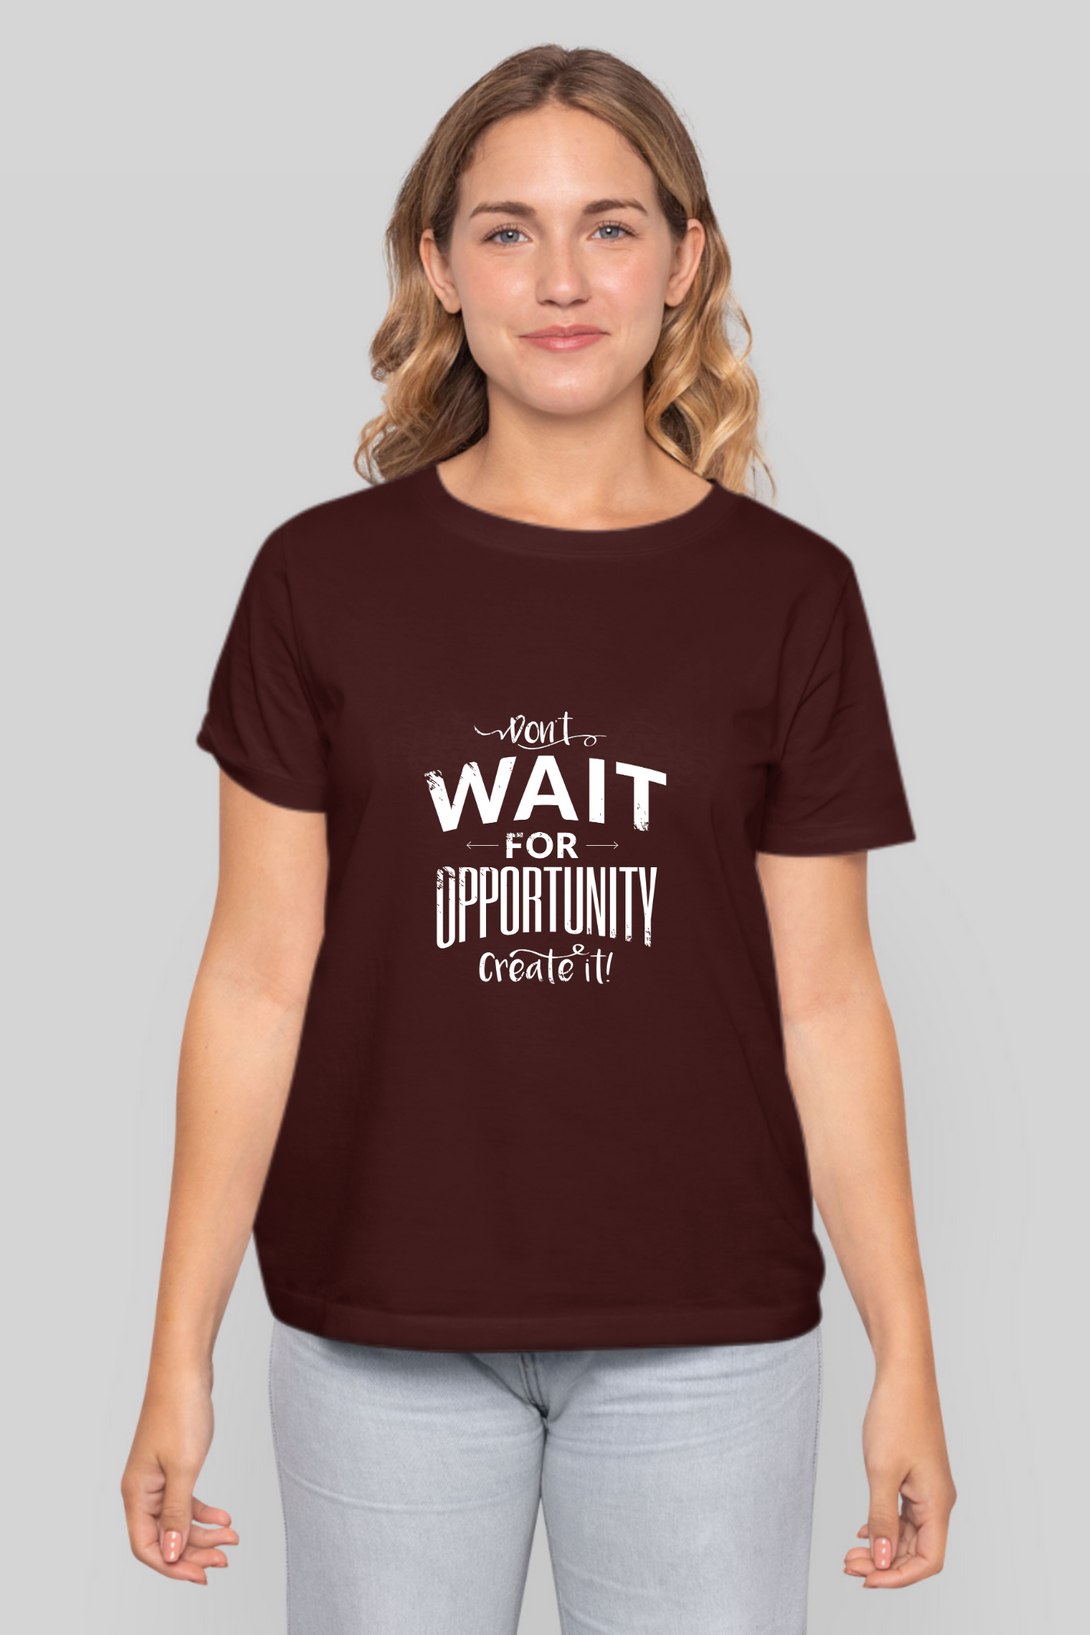 Create Opportunity Printed T-Shirt For Women - WowWaves - 9